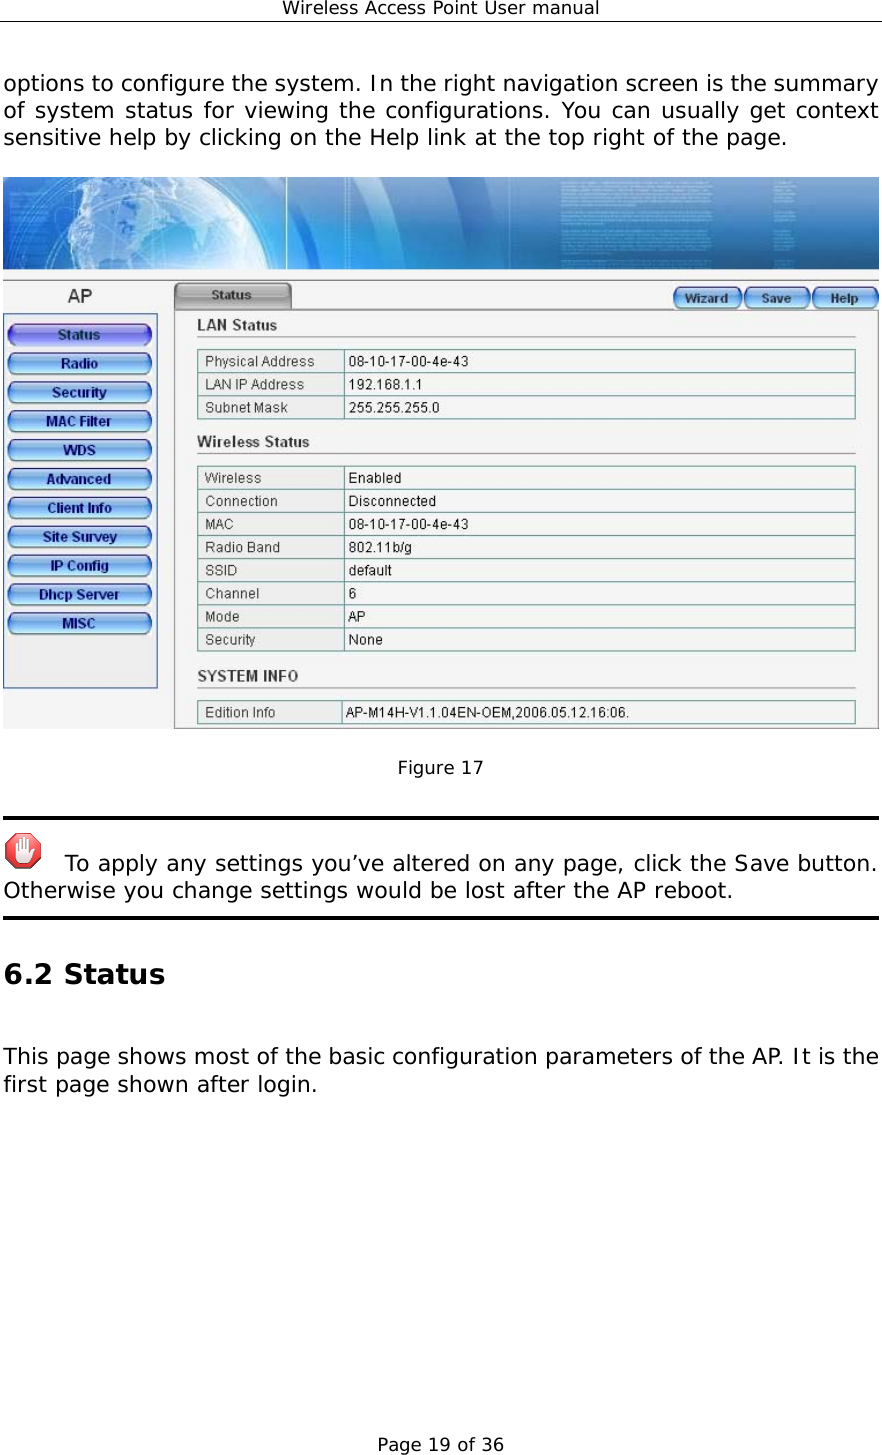 Wireless Access Point User manual Page 19 of 36 options to configure the system. In the right navigation screen is the summary of system status for viewing the configurations. You can usually get context sensitive help by clicking on the Help link at the top right of the page.    Figure 17     To apply any settings you’ve altered on any page, click the Save button. Otherwise you change settings would be lost after the AP reboot.  6.2 Status  This page shows most of the basic configuration parameters of the AP. It is the first page shown after login.  